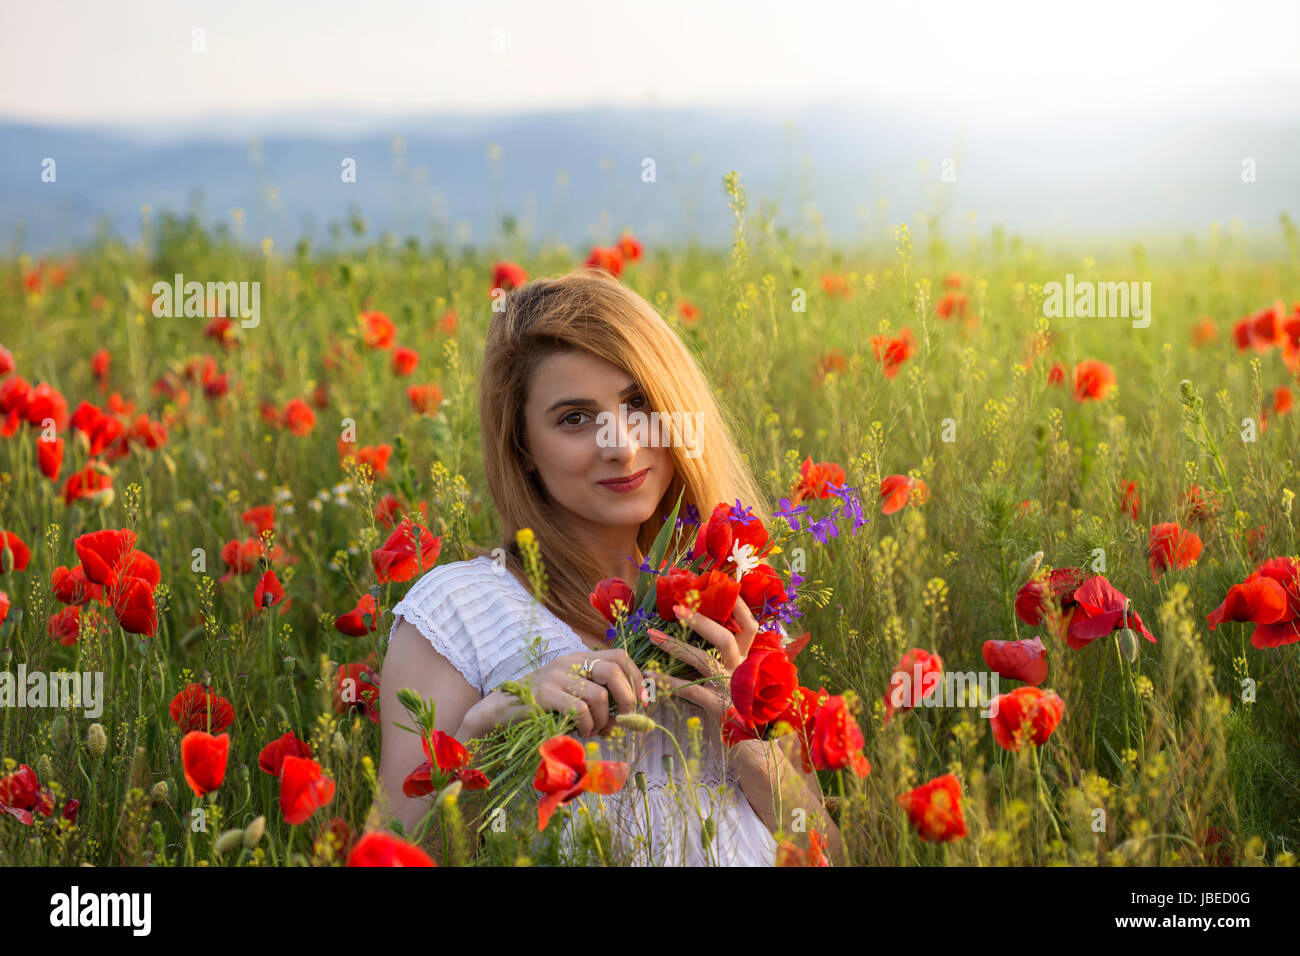 Beautiful happy woman in poppy field holding a bouquet of poppies Stock Photo